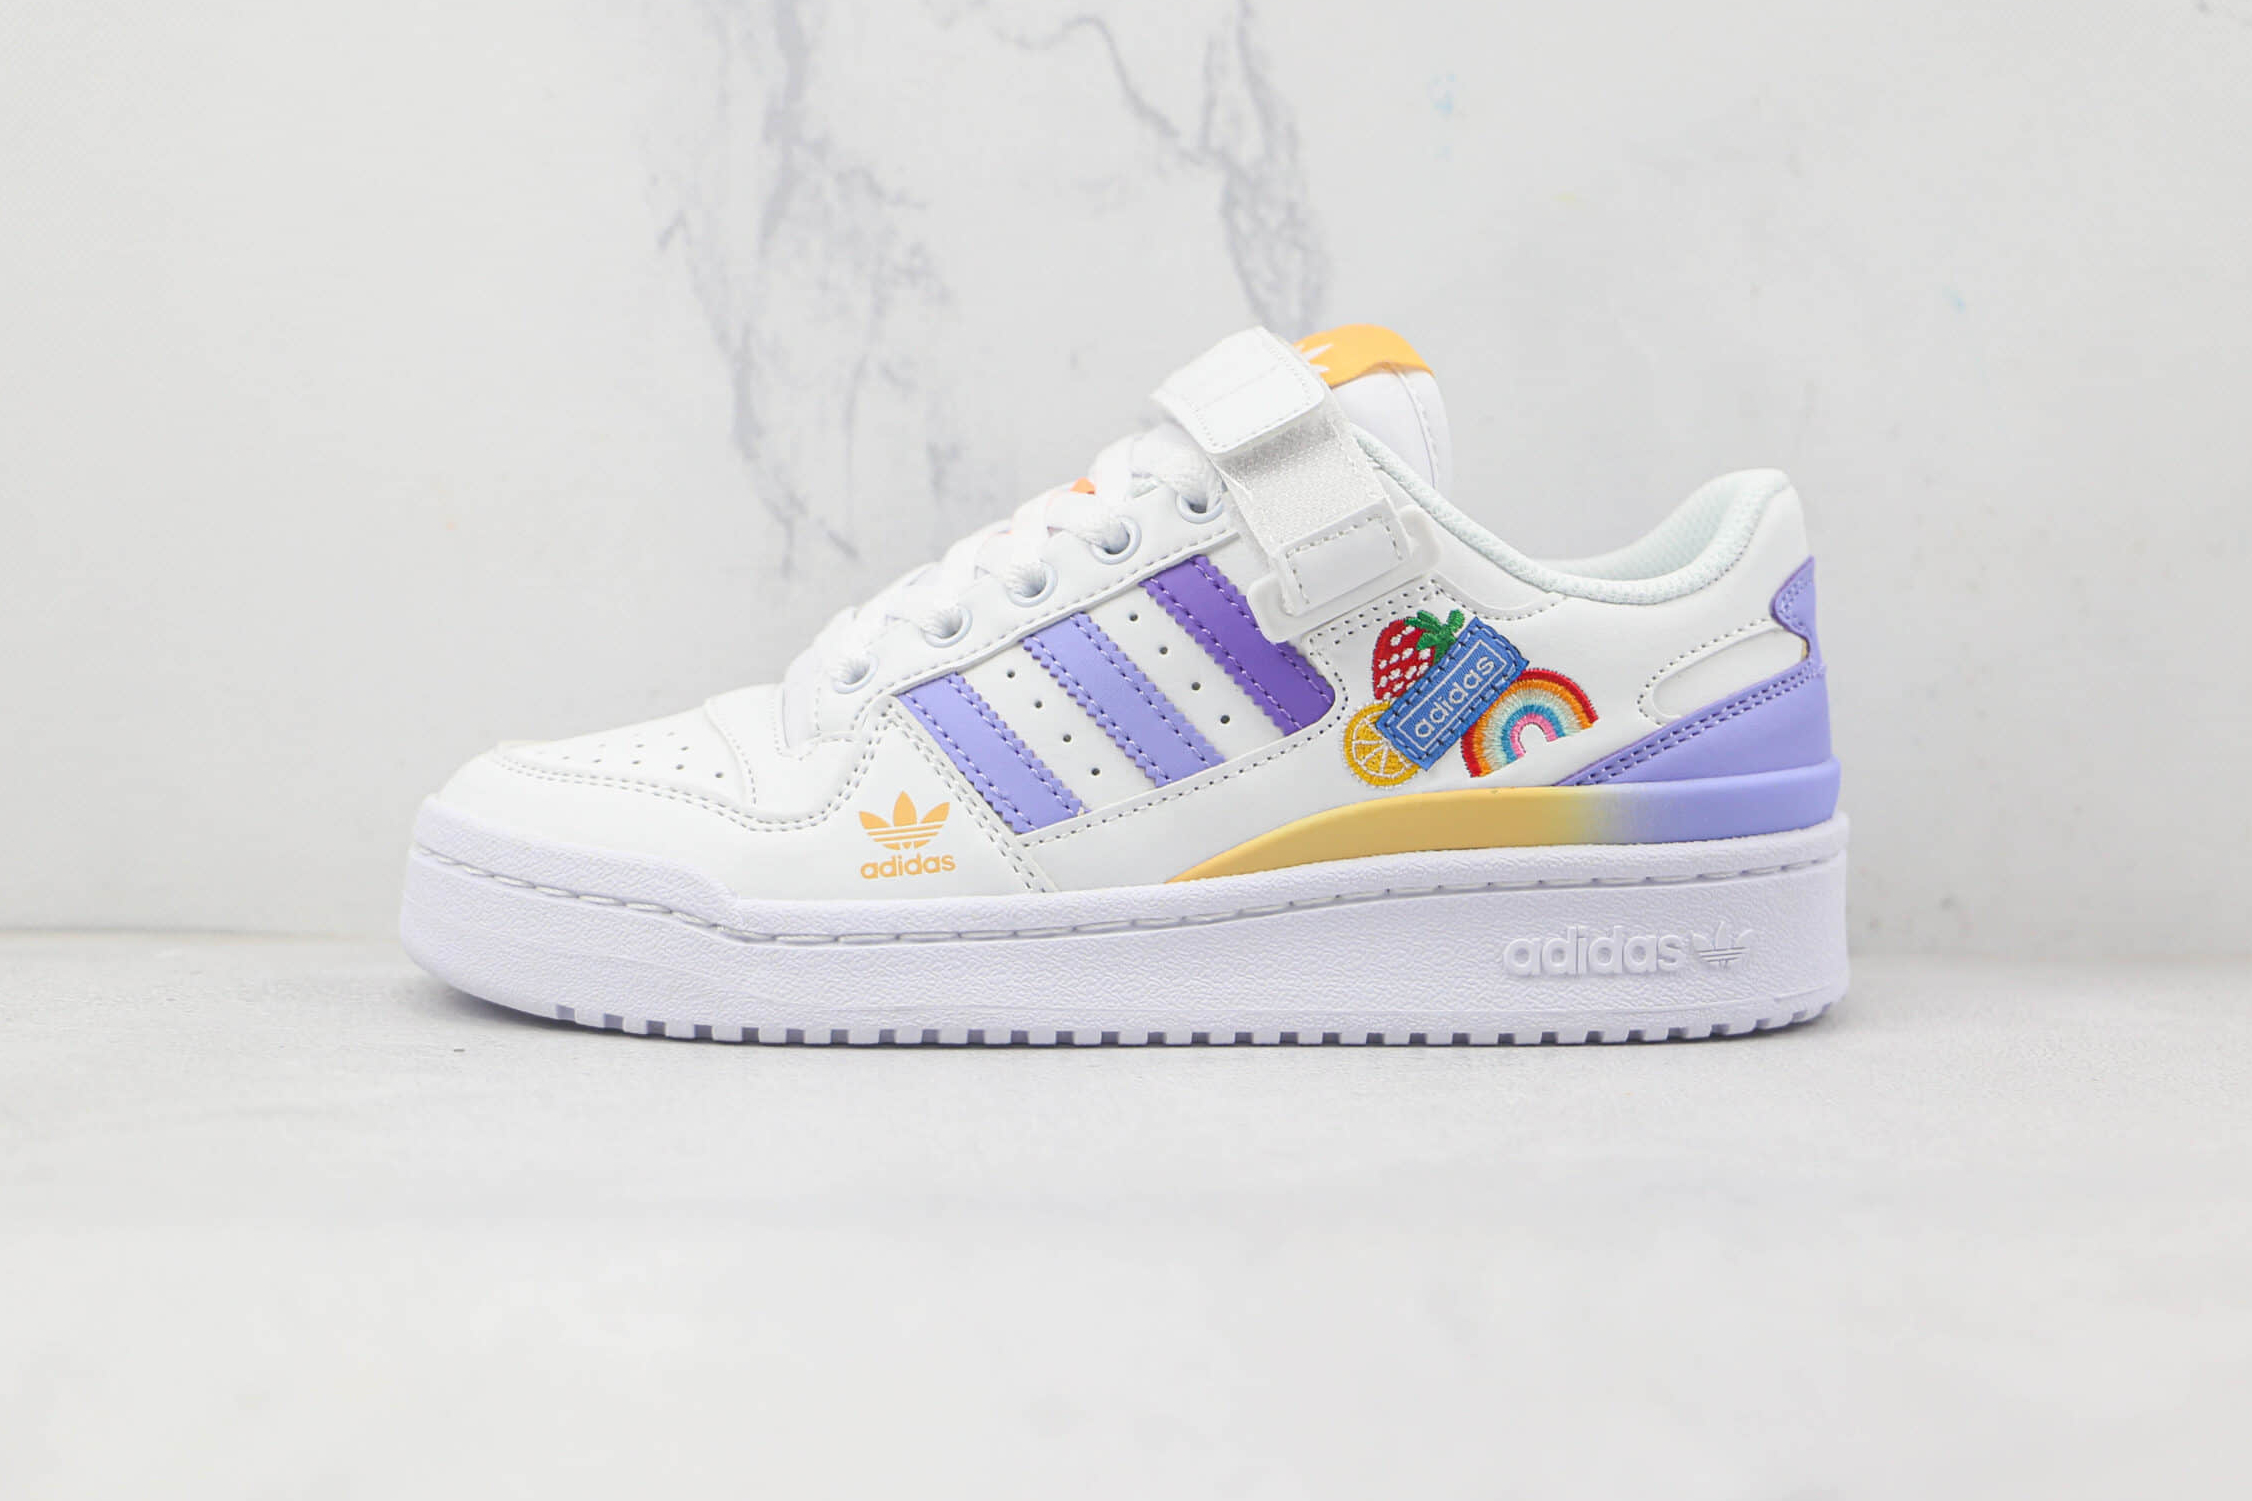 Adidas Forum Low J White Light Purple GY8209 - Stylish Sneakers for Kids